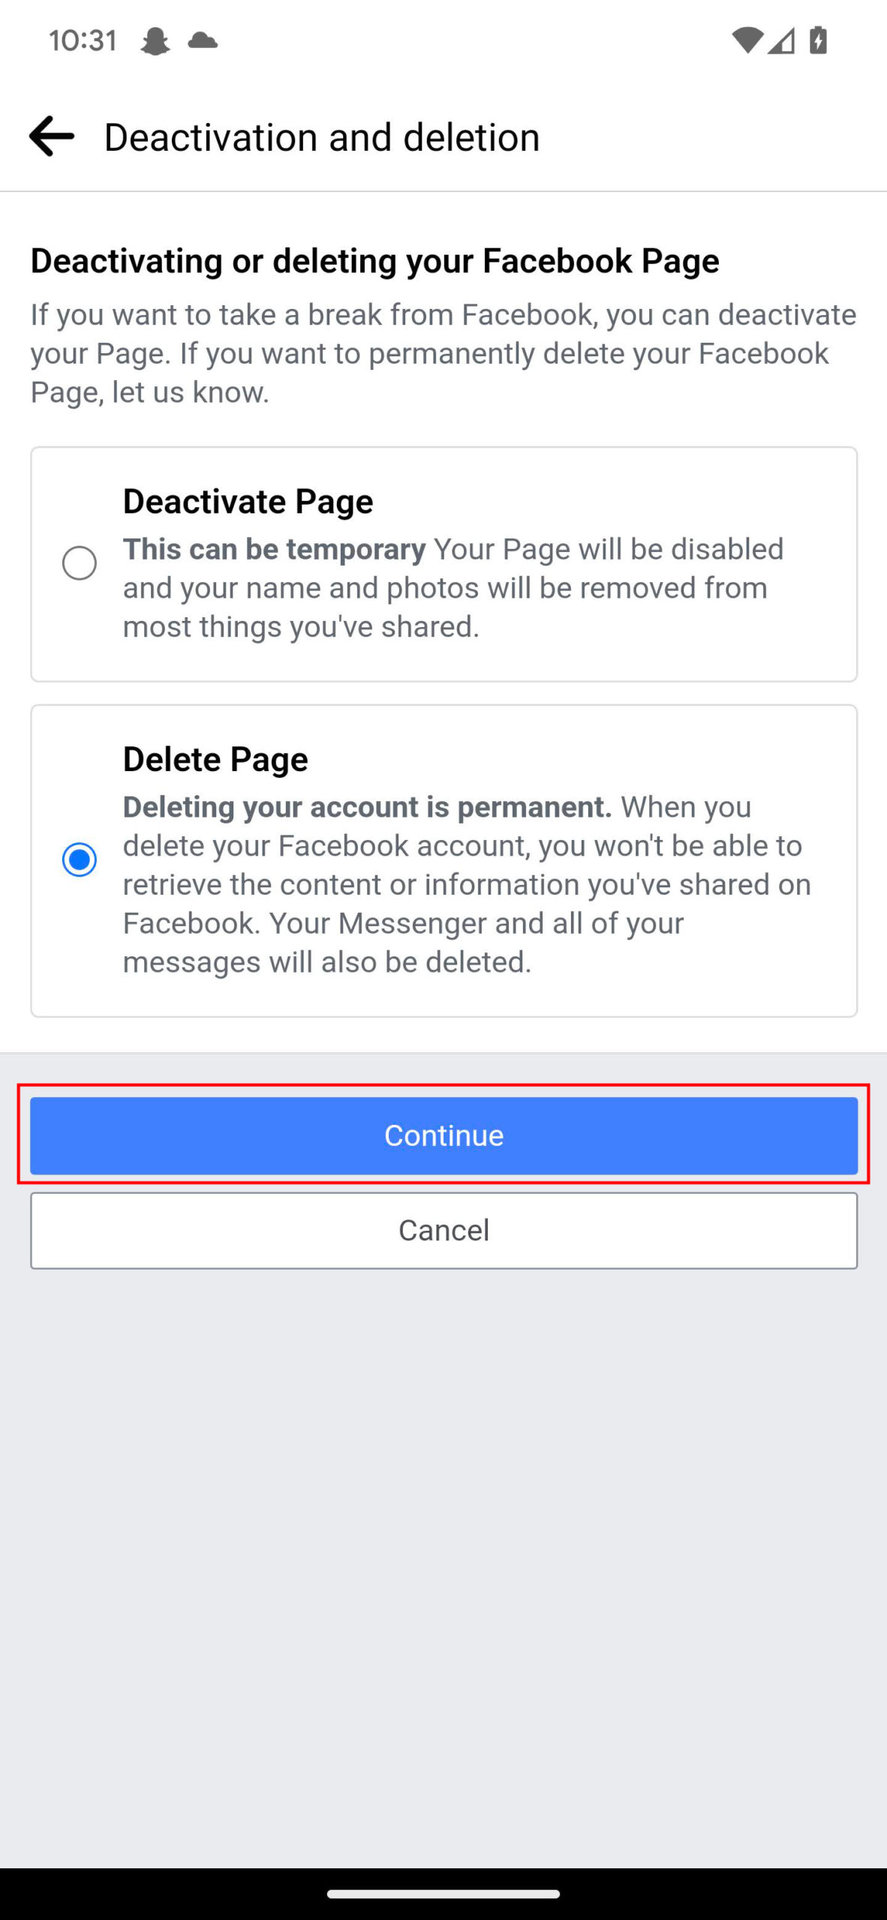 How to deactivate or delete Facebook page on mobile 6